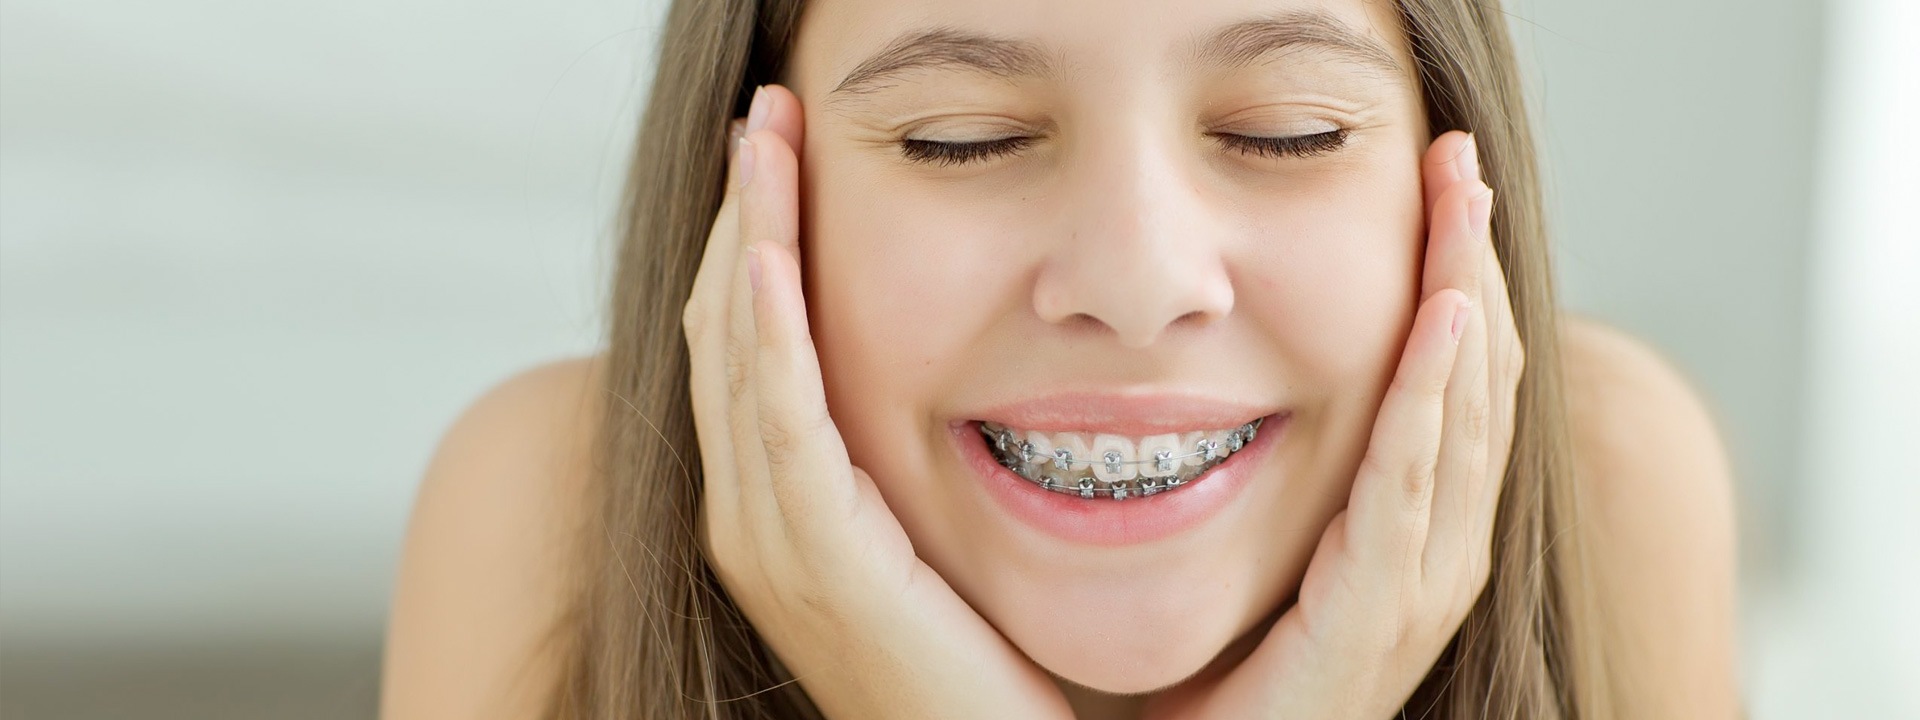 Clear Ceramic Braces vs. Invisalign: Which Is Right for You